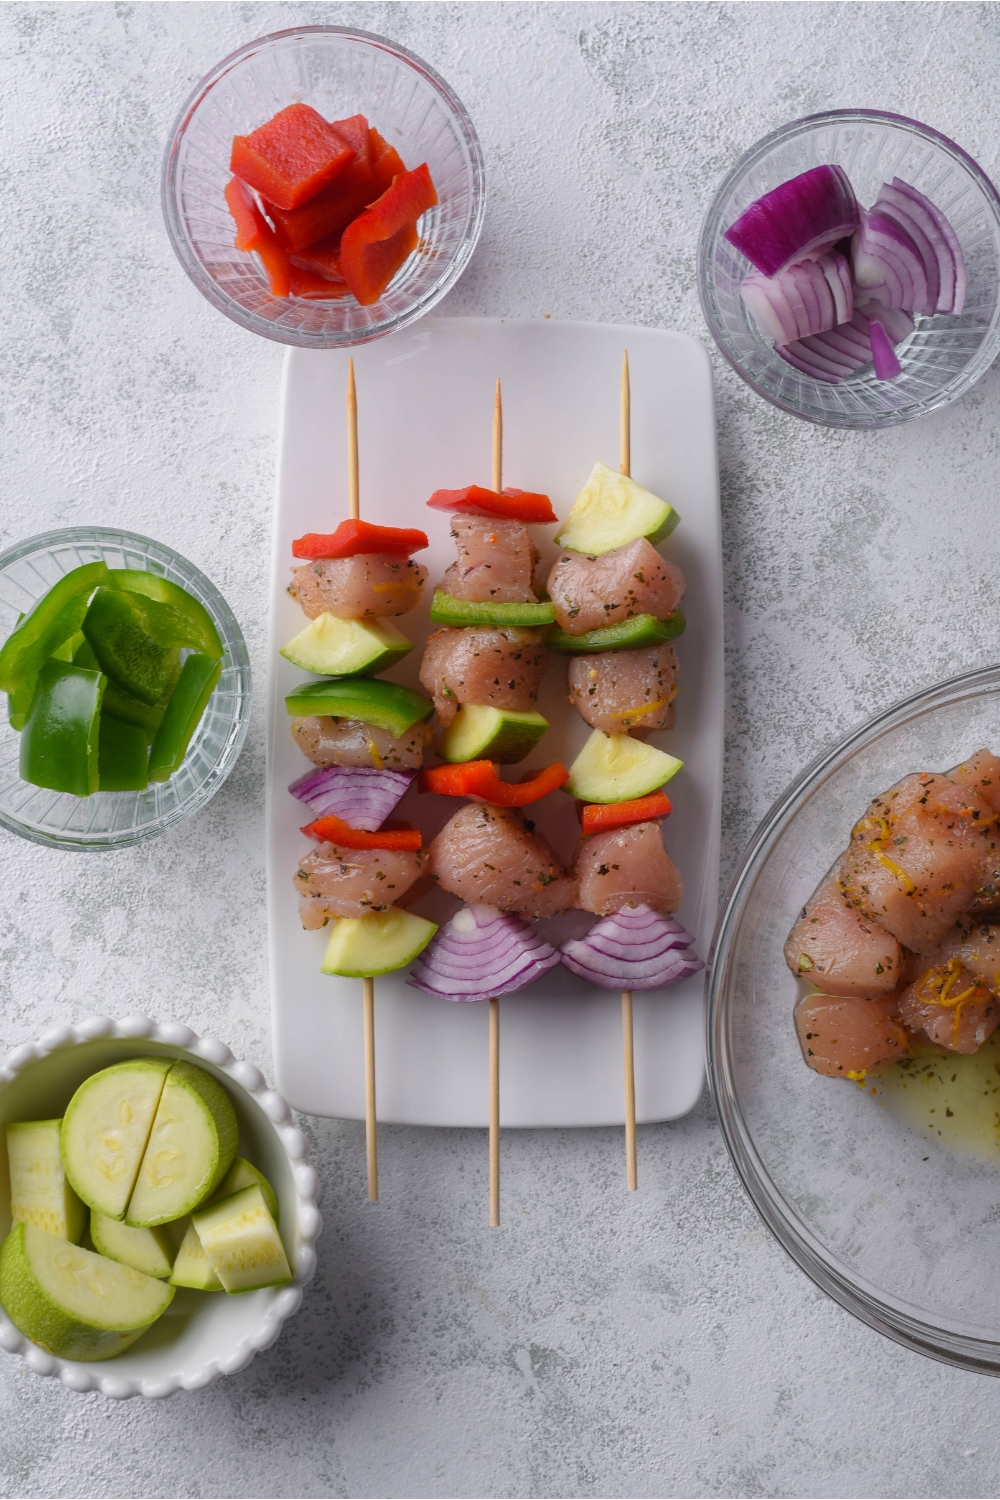 Three skewers of alternating pieces of raw marinated chicken, red onion, zucchini, and red bell peppers on a white plate, surrounded by bowls of the skewer ingredients.